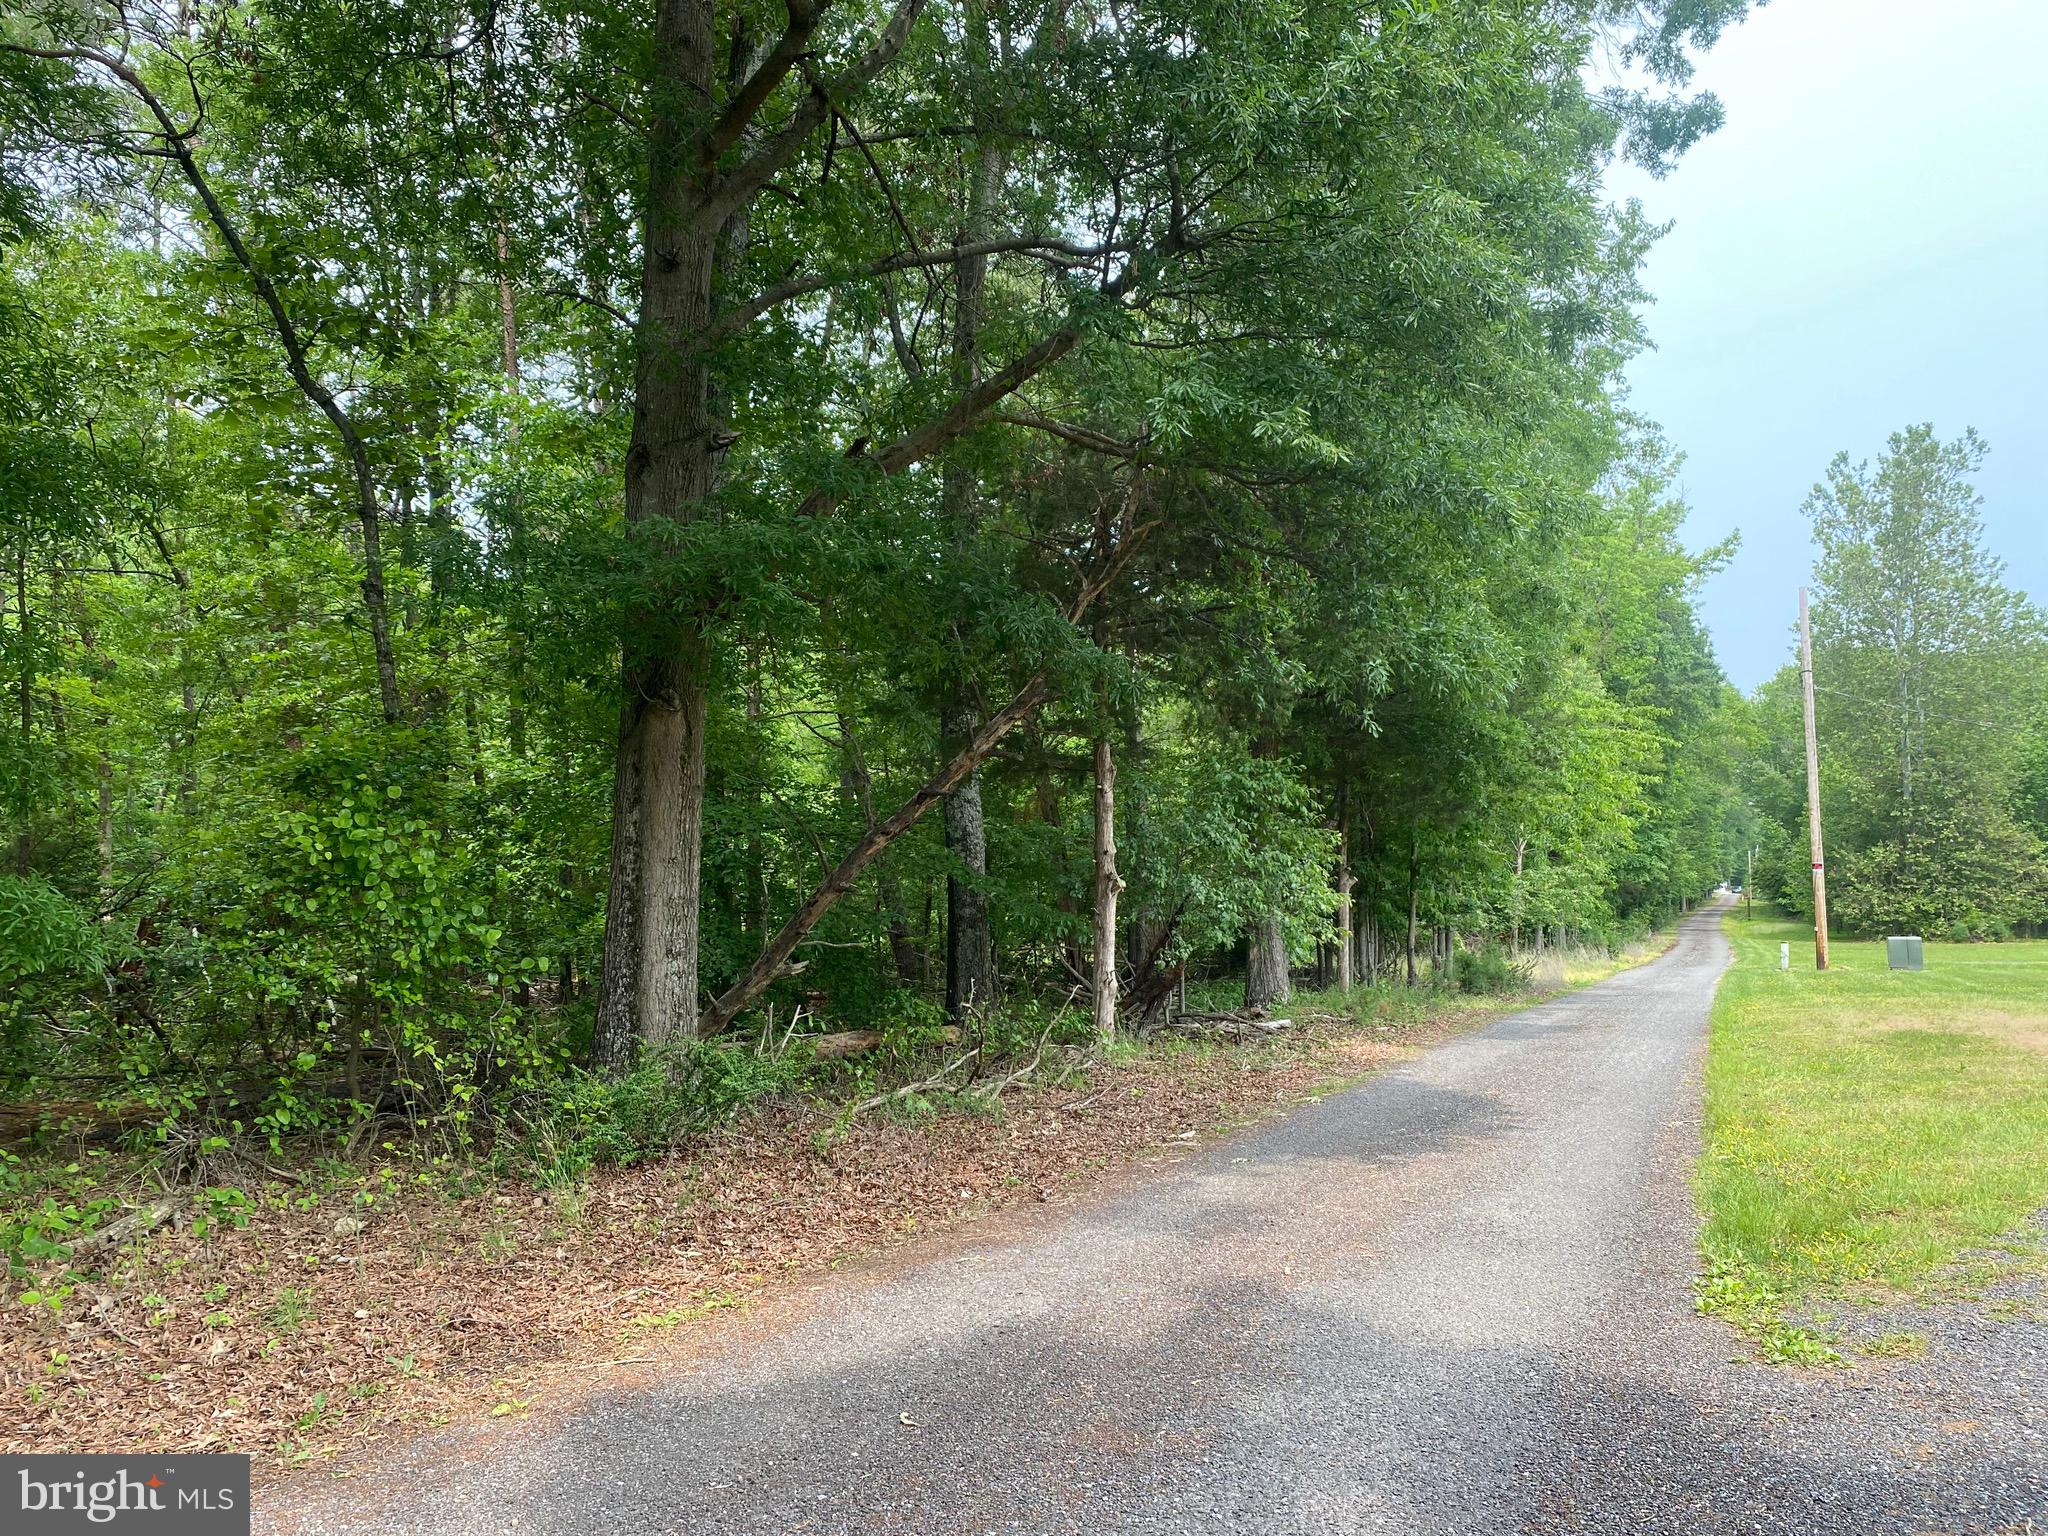 a view of a road with trees in the background